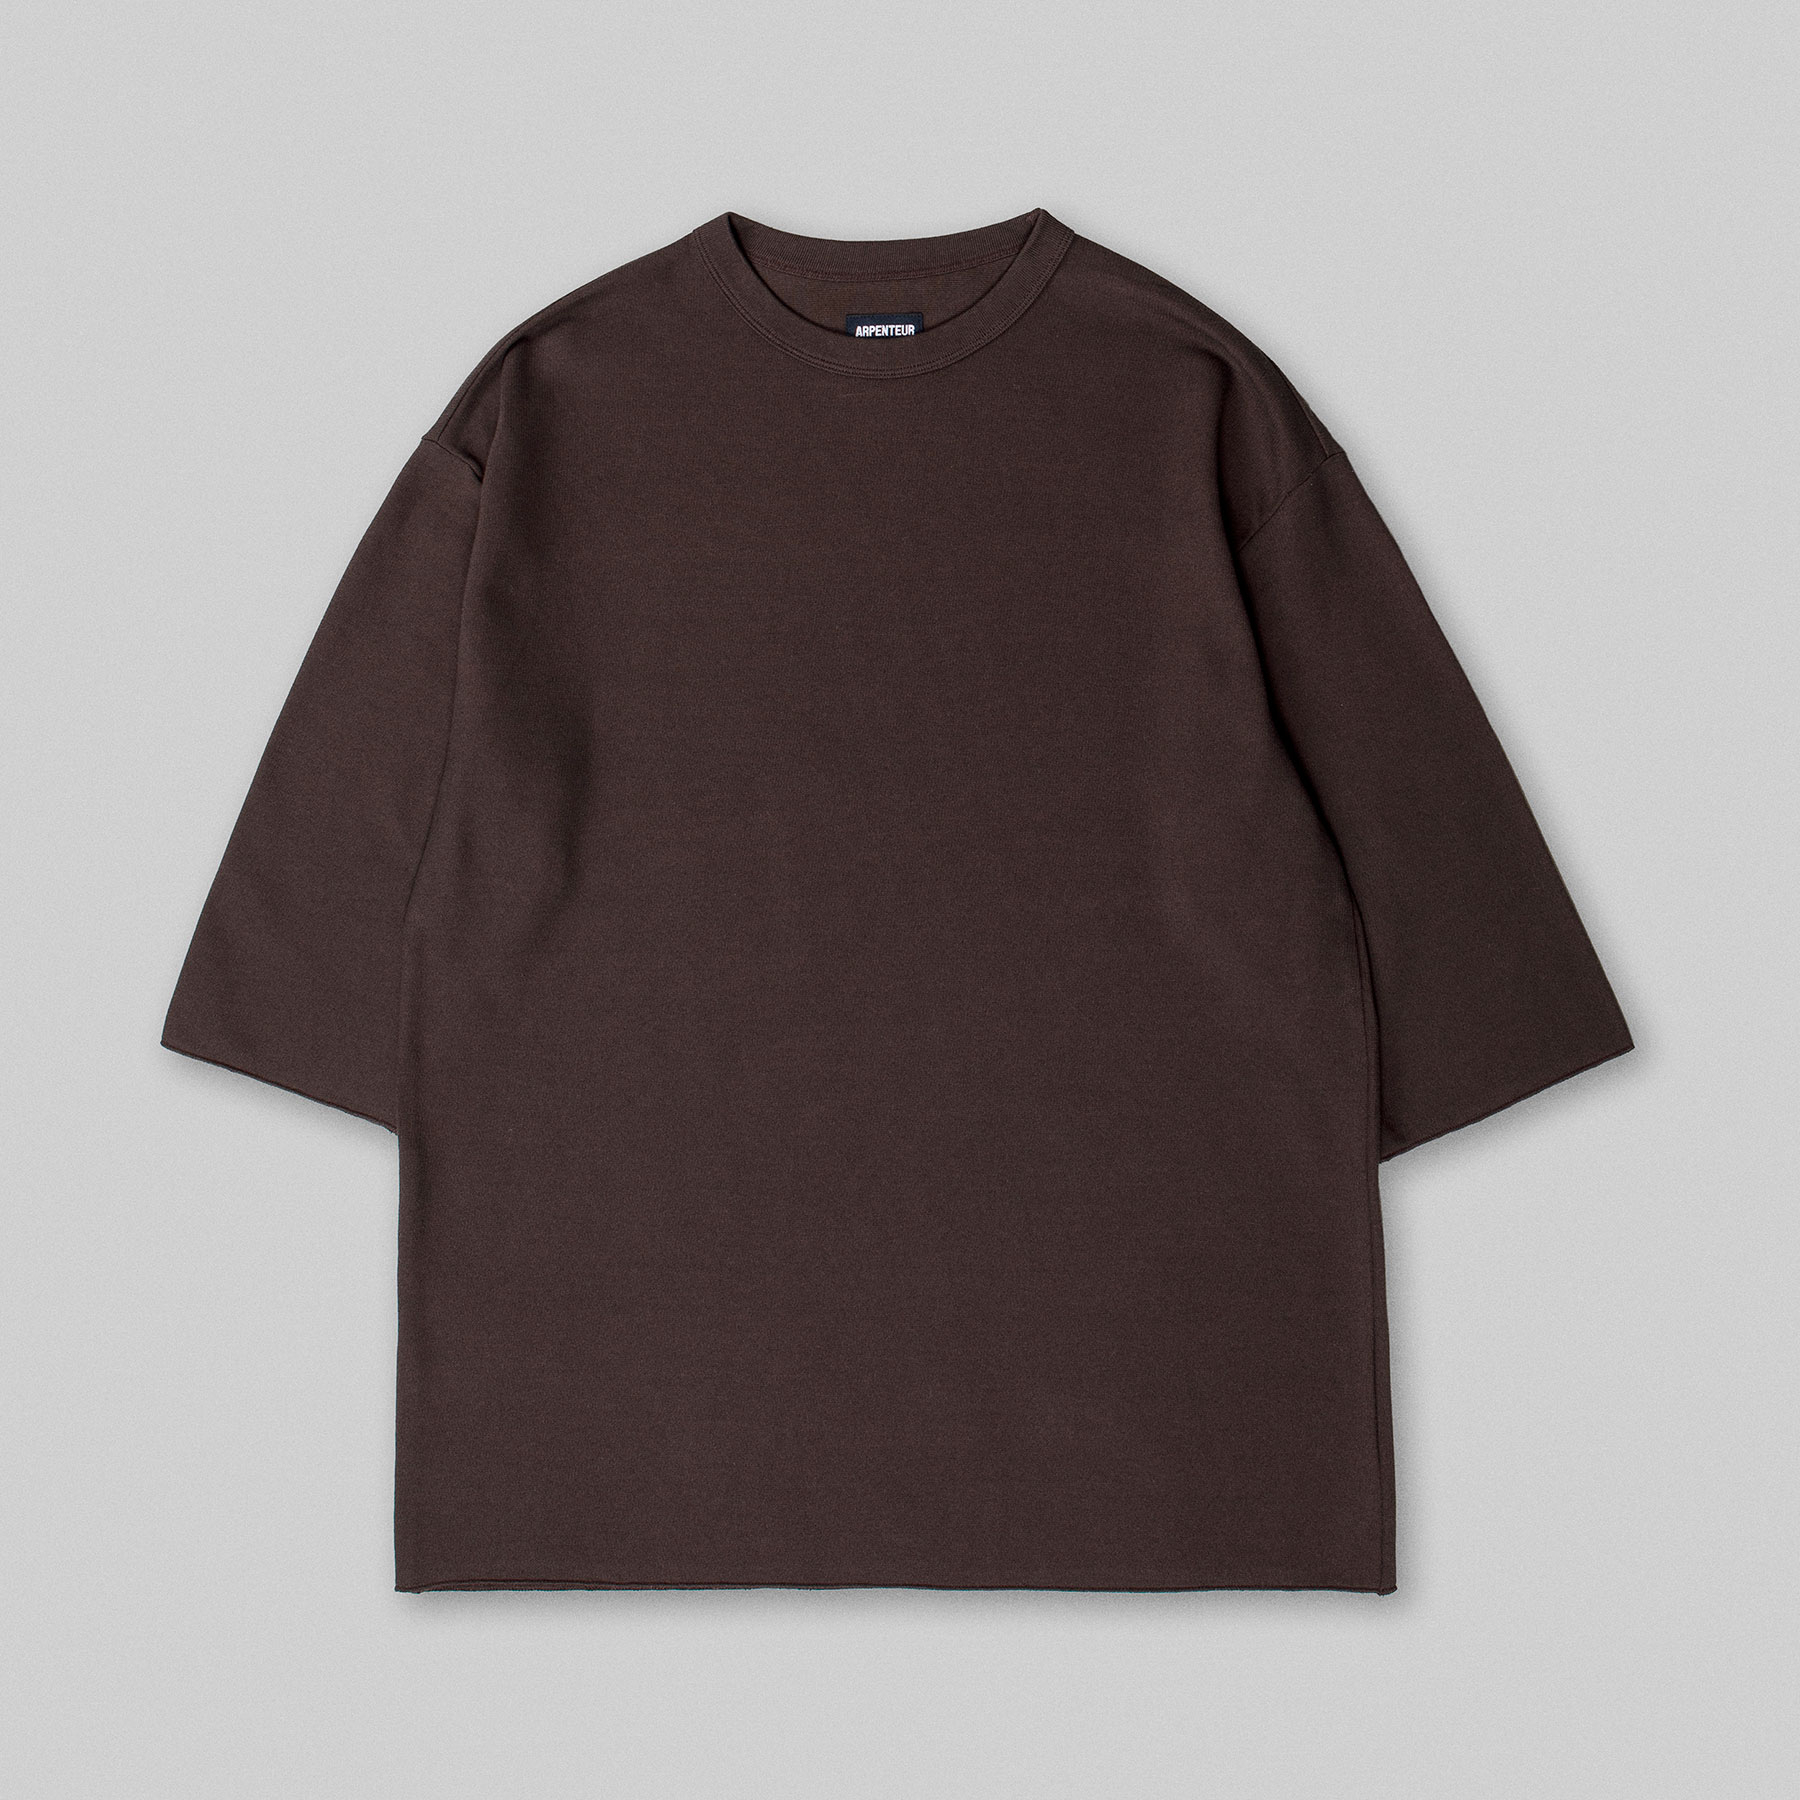 MARINIERE t-shirt by Arpenteur in Soil brown color